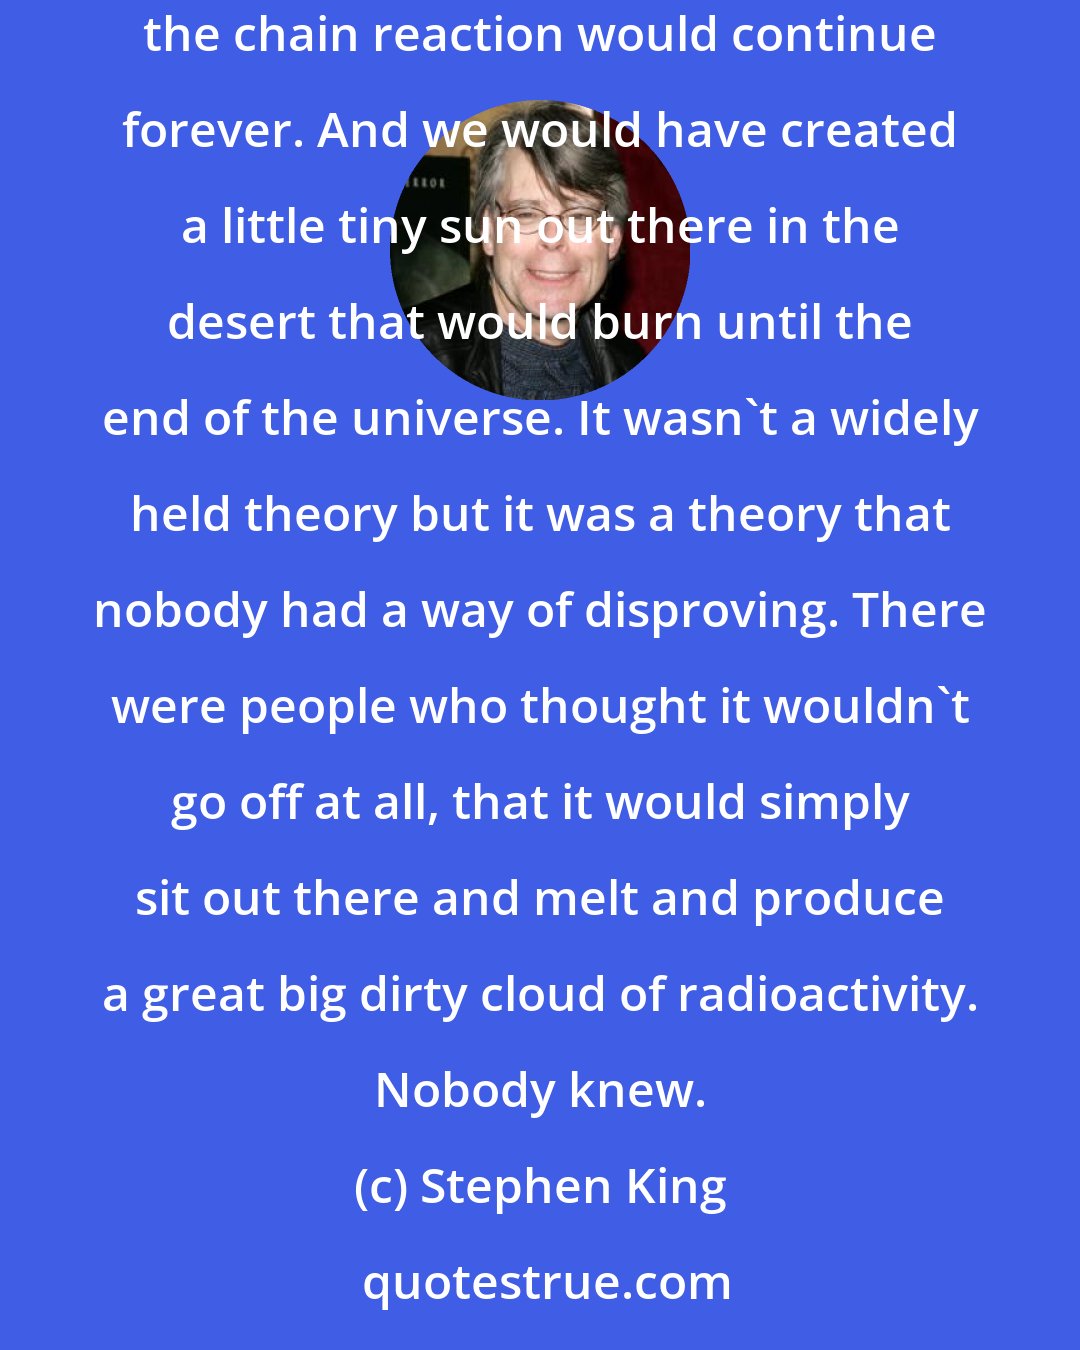 Stephen King: When we blew the first atomic bomb at White Sands near the end of the war, nobody knew what was going to happen. There was a theory that the chain reaction would continue forever. And we would have created a little tiny sun out there in the desert that would burn until the end of the universe. It wasn't a widely held theory but it was a theory that nobody had a way of disproving. There were people who thought it wouldn't go off at all, that it would simply sit out there and melt and produce a great big dirty cloud of radioactivity. Nobody knew.